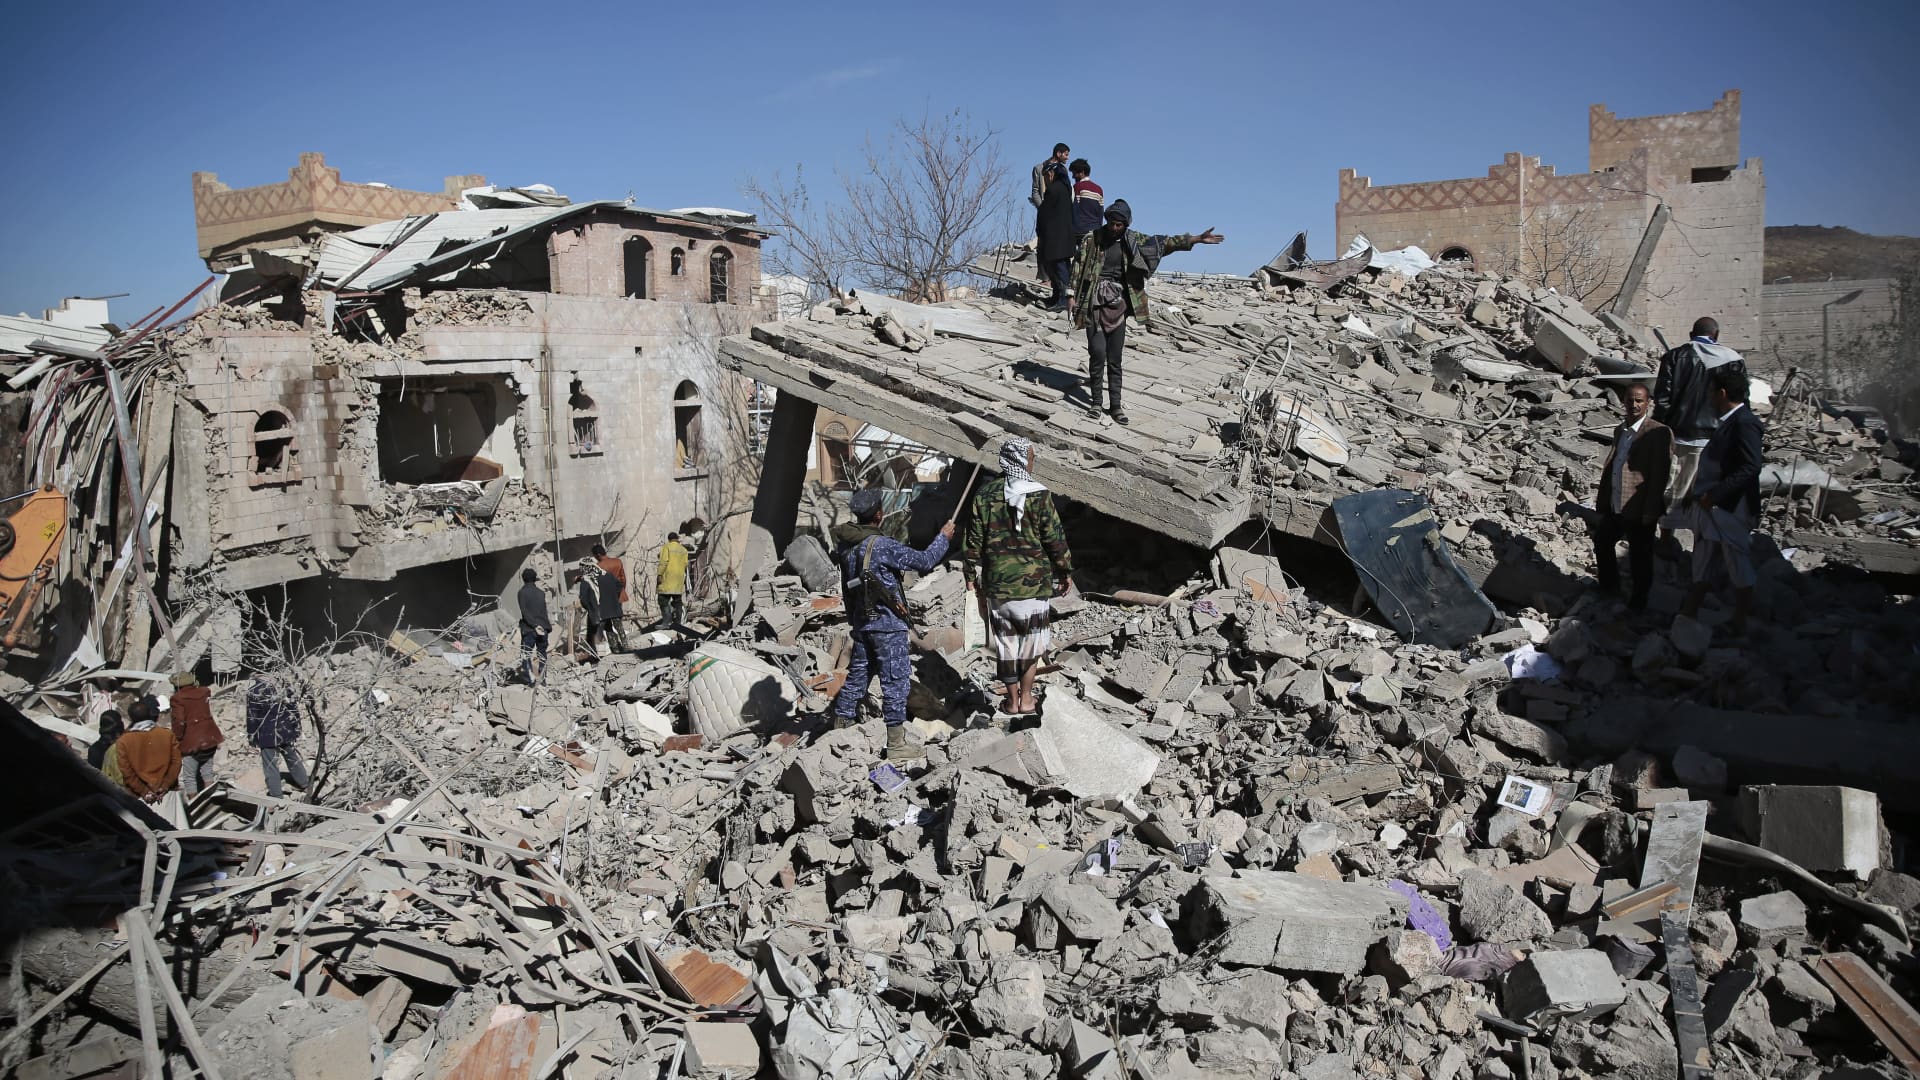 Yemenis inspect the wreckage of buildings after they were hit by Saudi-led coalition airstrikes, in Sanaa, Yemen, Tuesday, Jan. 18, 2022. The coalition fighting in Yemen announced it had started a bombing campaign targeting Houthi sites a day after a fatal attack on an oil facility in the capital of the United Arab Emirates claimed by Yemen's Houthi rebels.